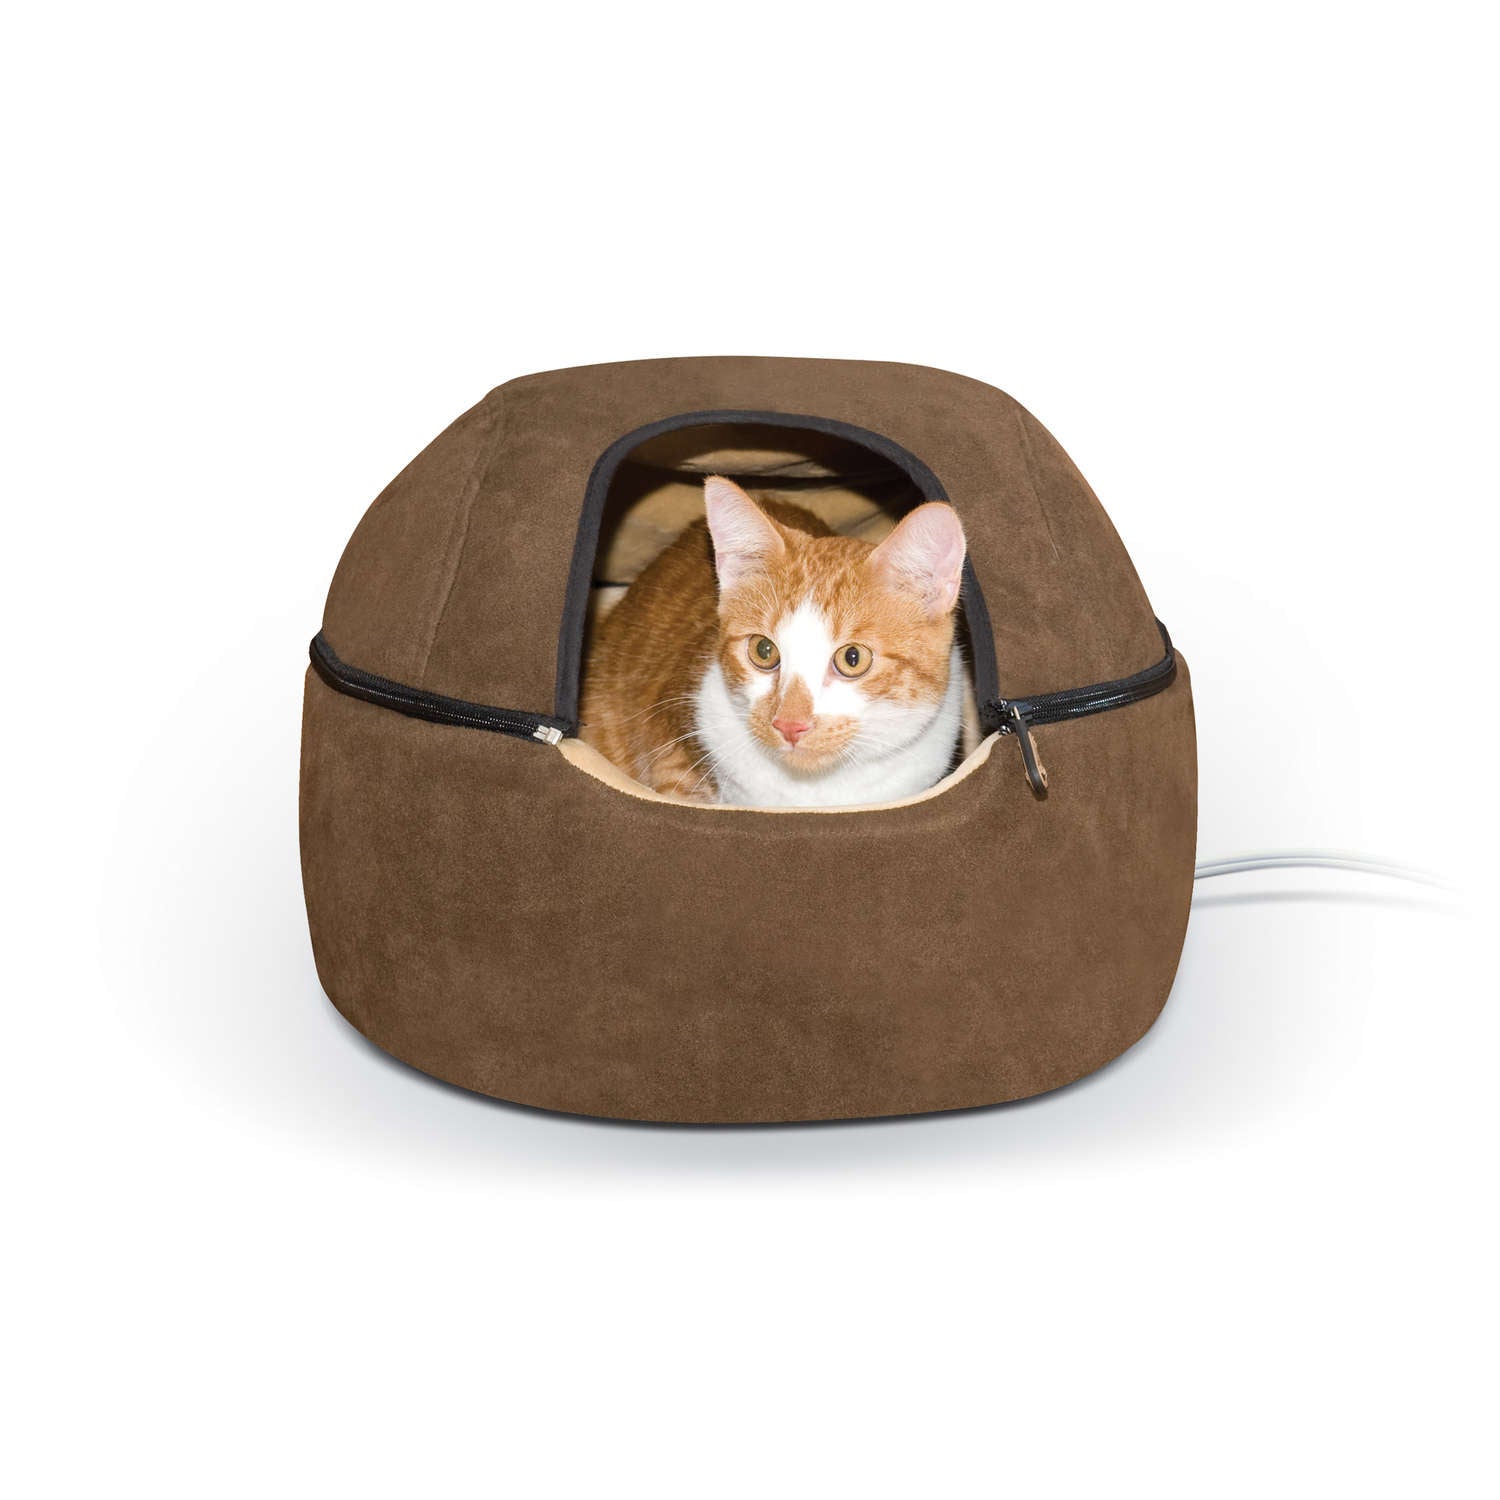 K&h Pet Products Kh3897 Kitty Dome Bed Heated